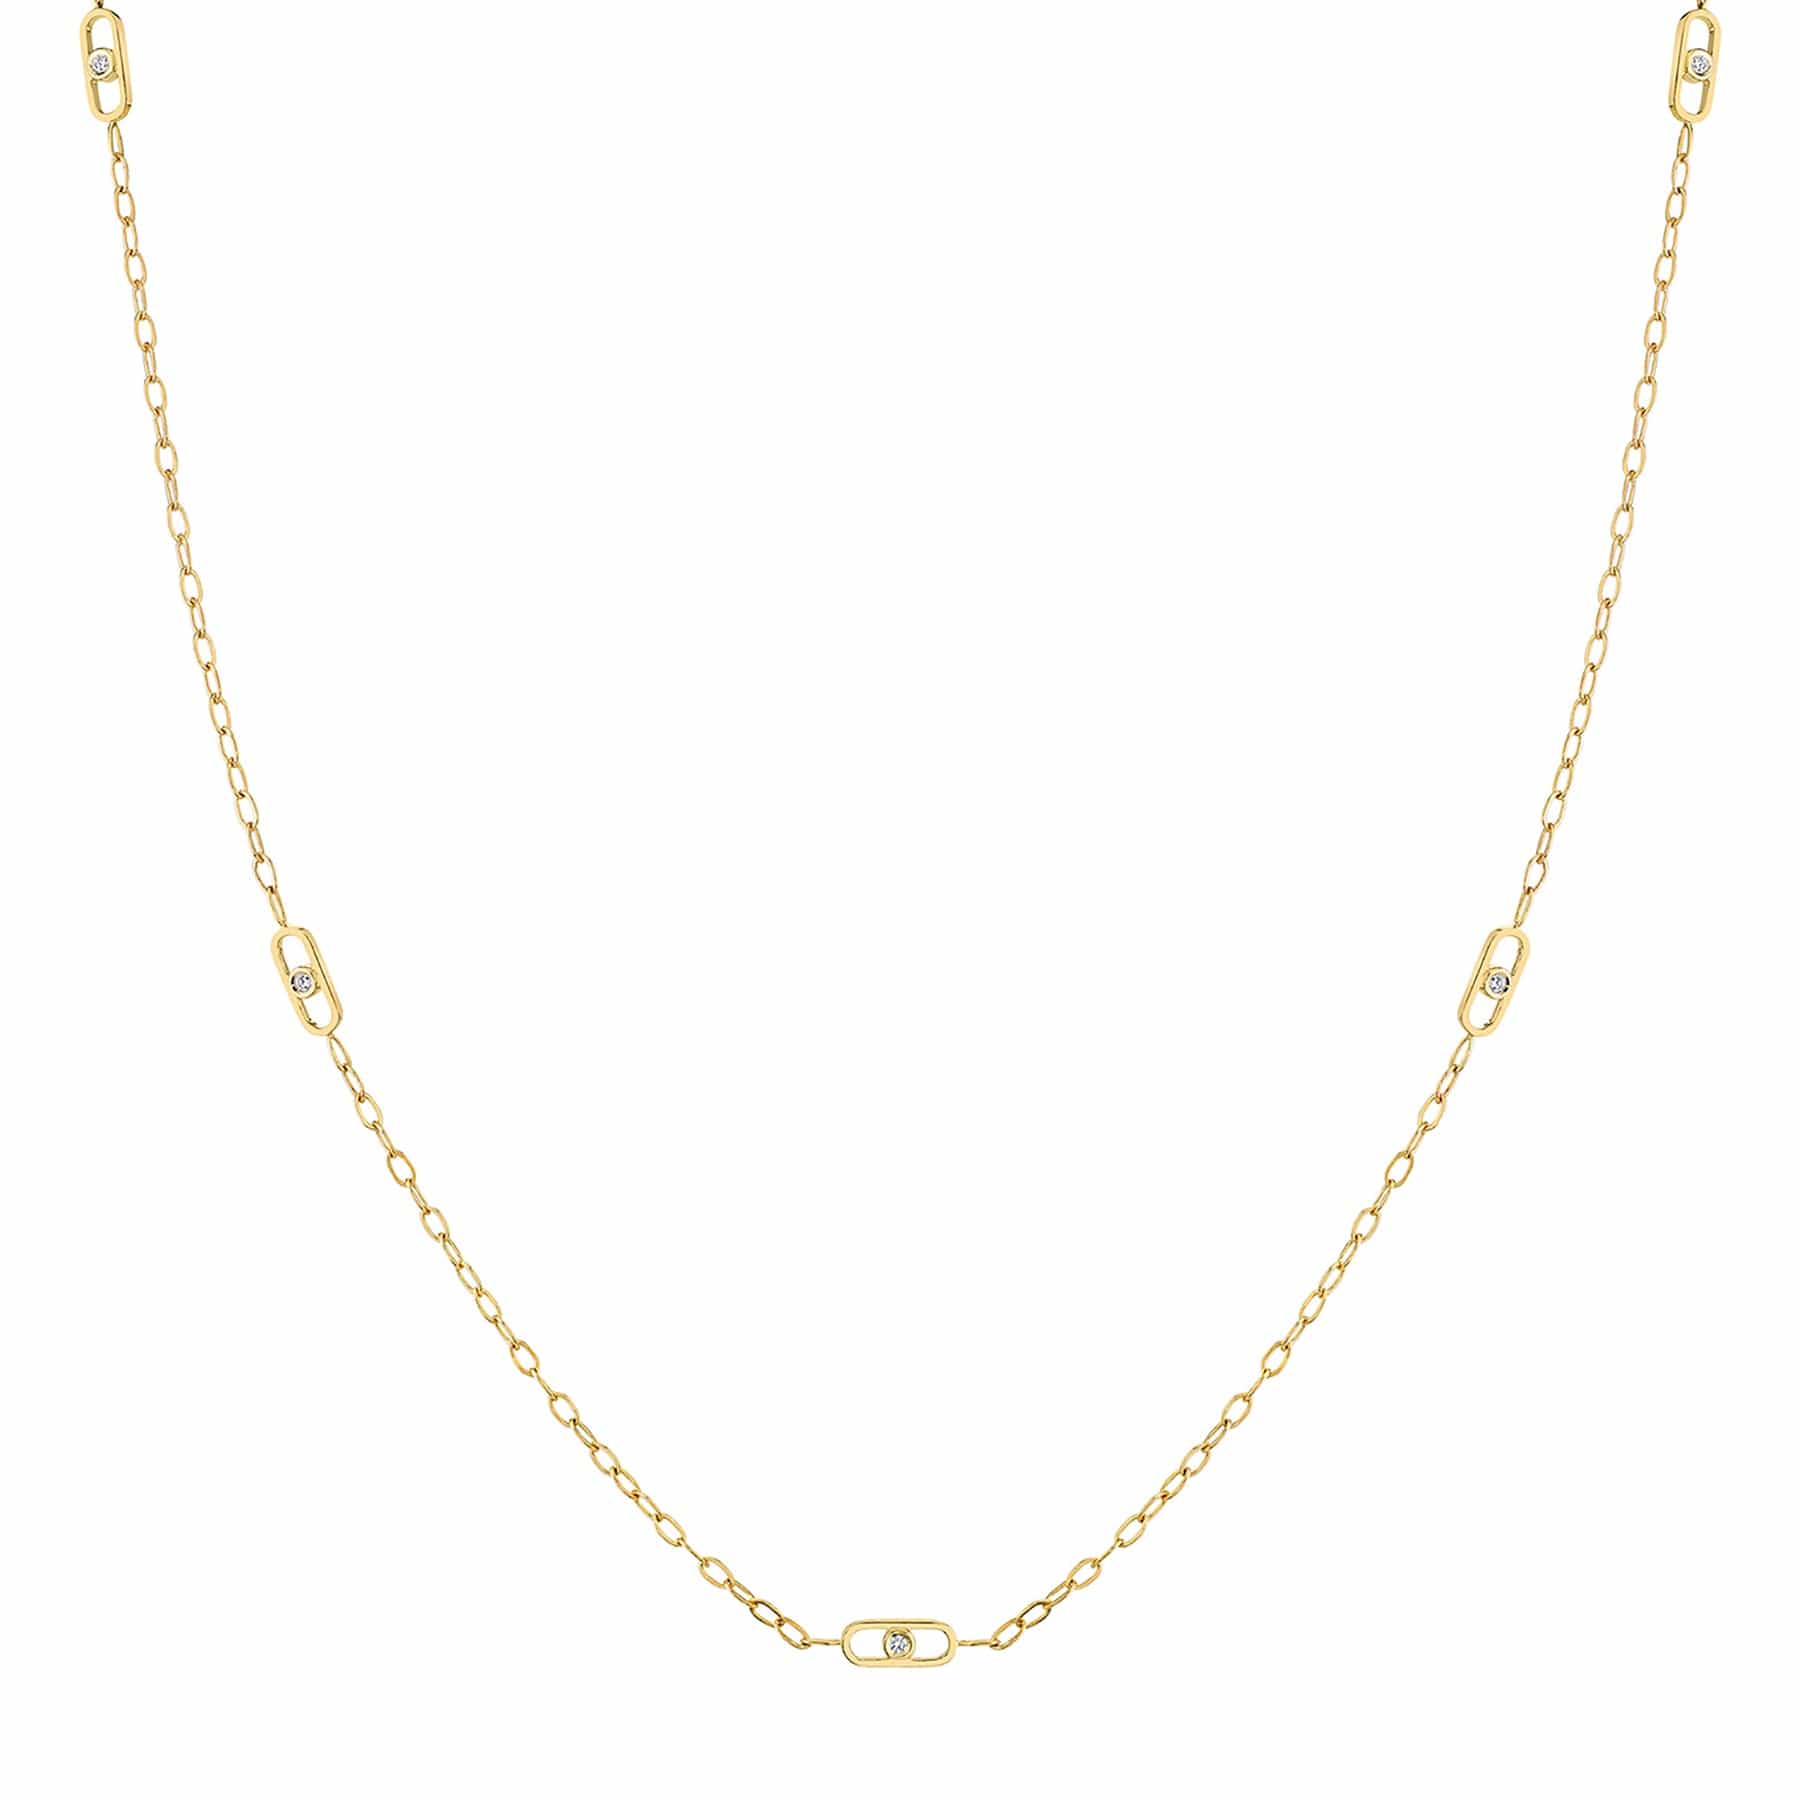 MICHAEL M Necklaces 14K Yellow Gold / 20" Streamlined Necklace Yellow Gold CN351-20"